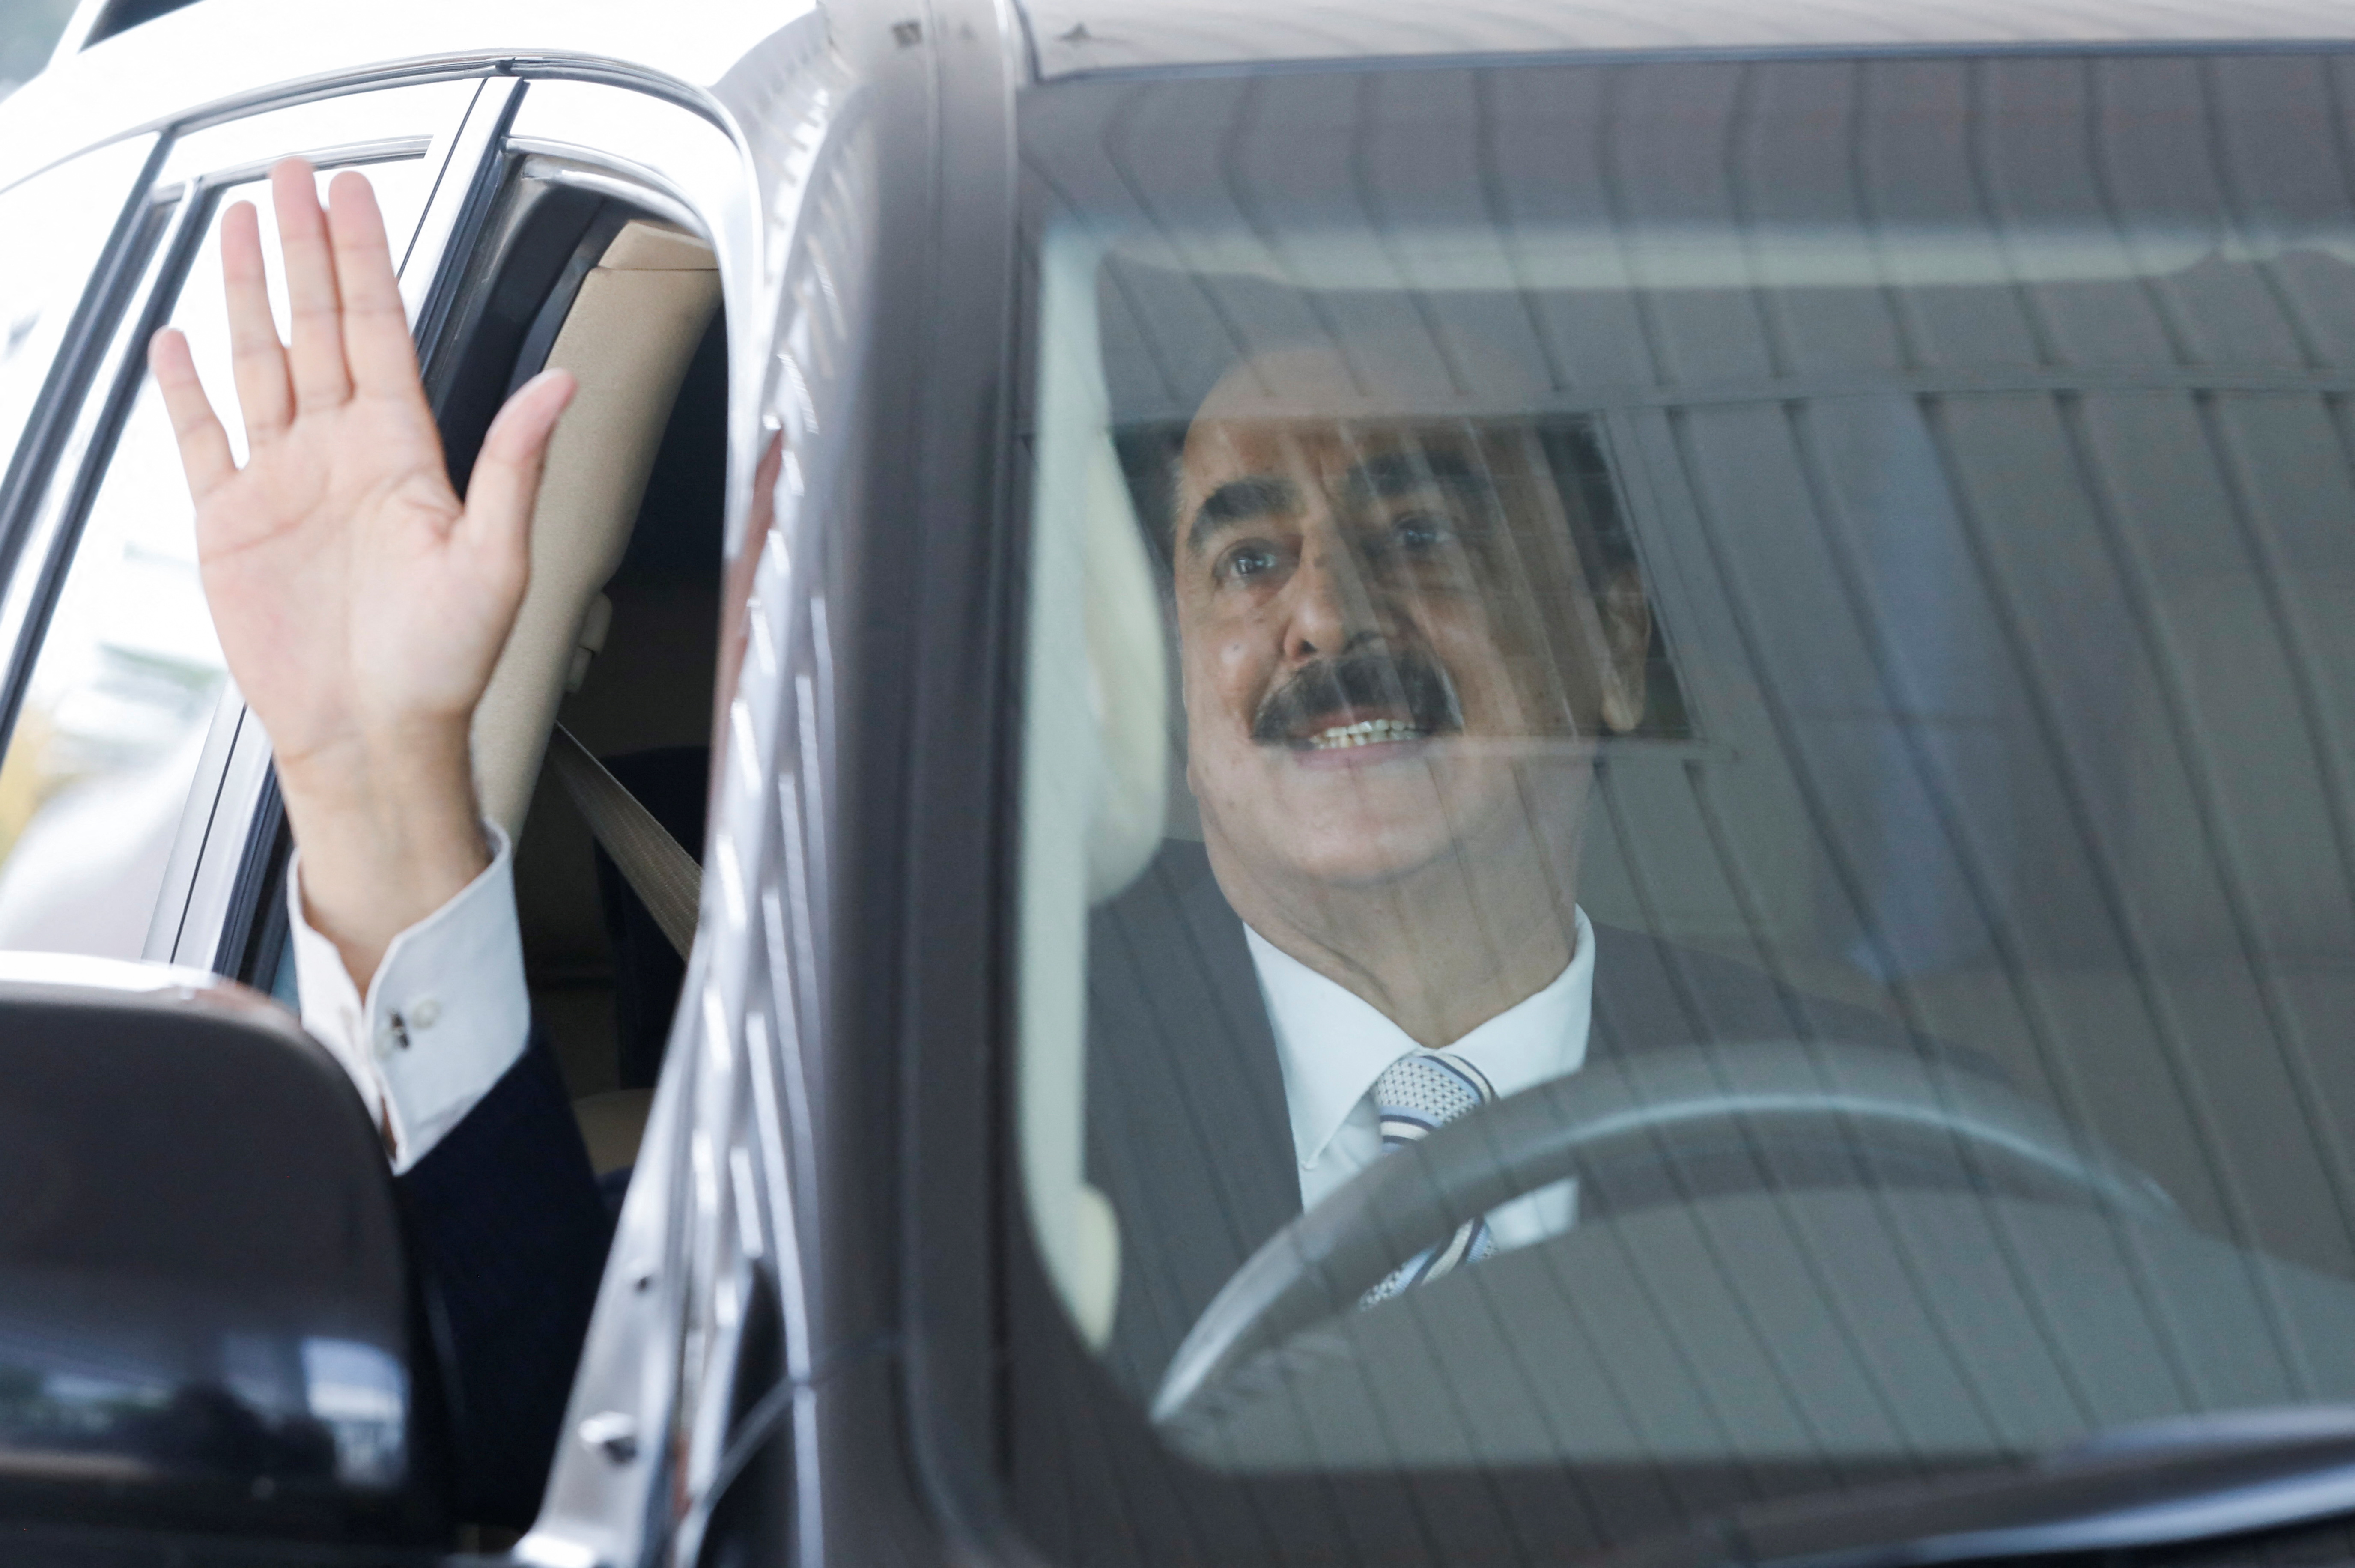 Pakistan's former Prime Minister Yousaf Raza Gilani and leader of the Pakistan People's Party (PPP) waves to the cameras as he arrives at the Parliament House building in Islamabad,